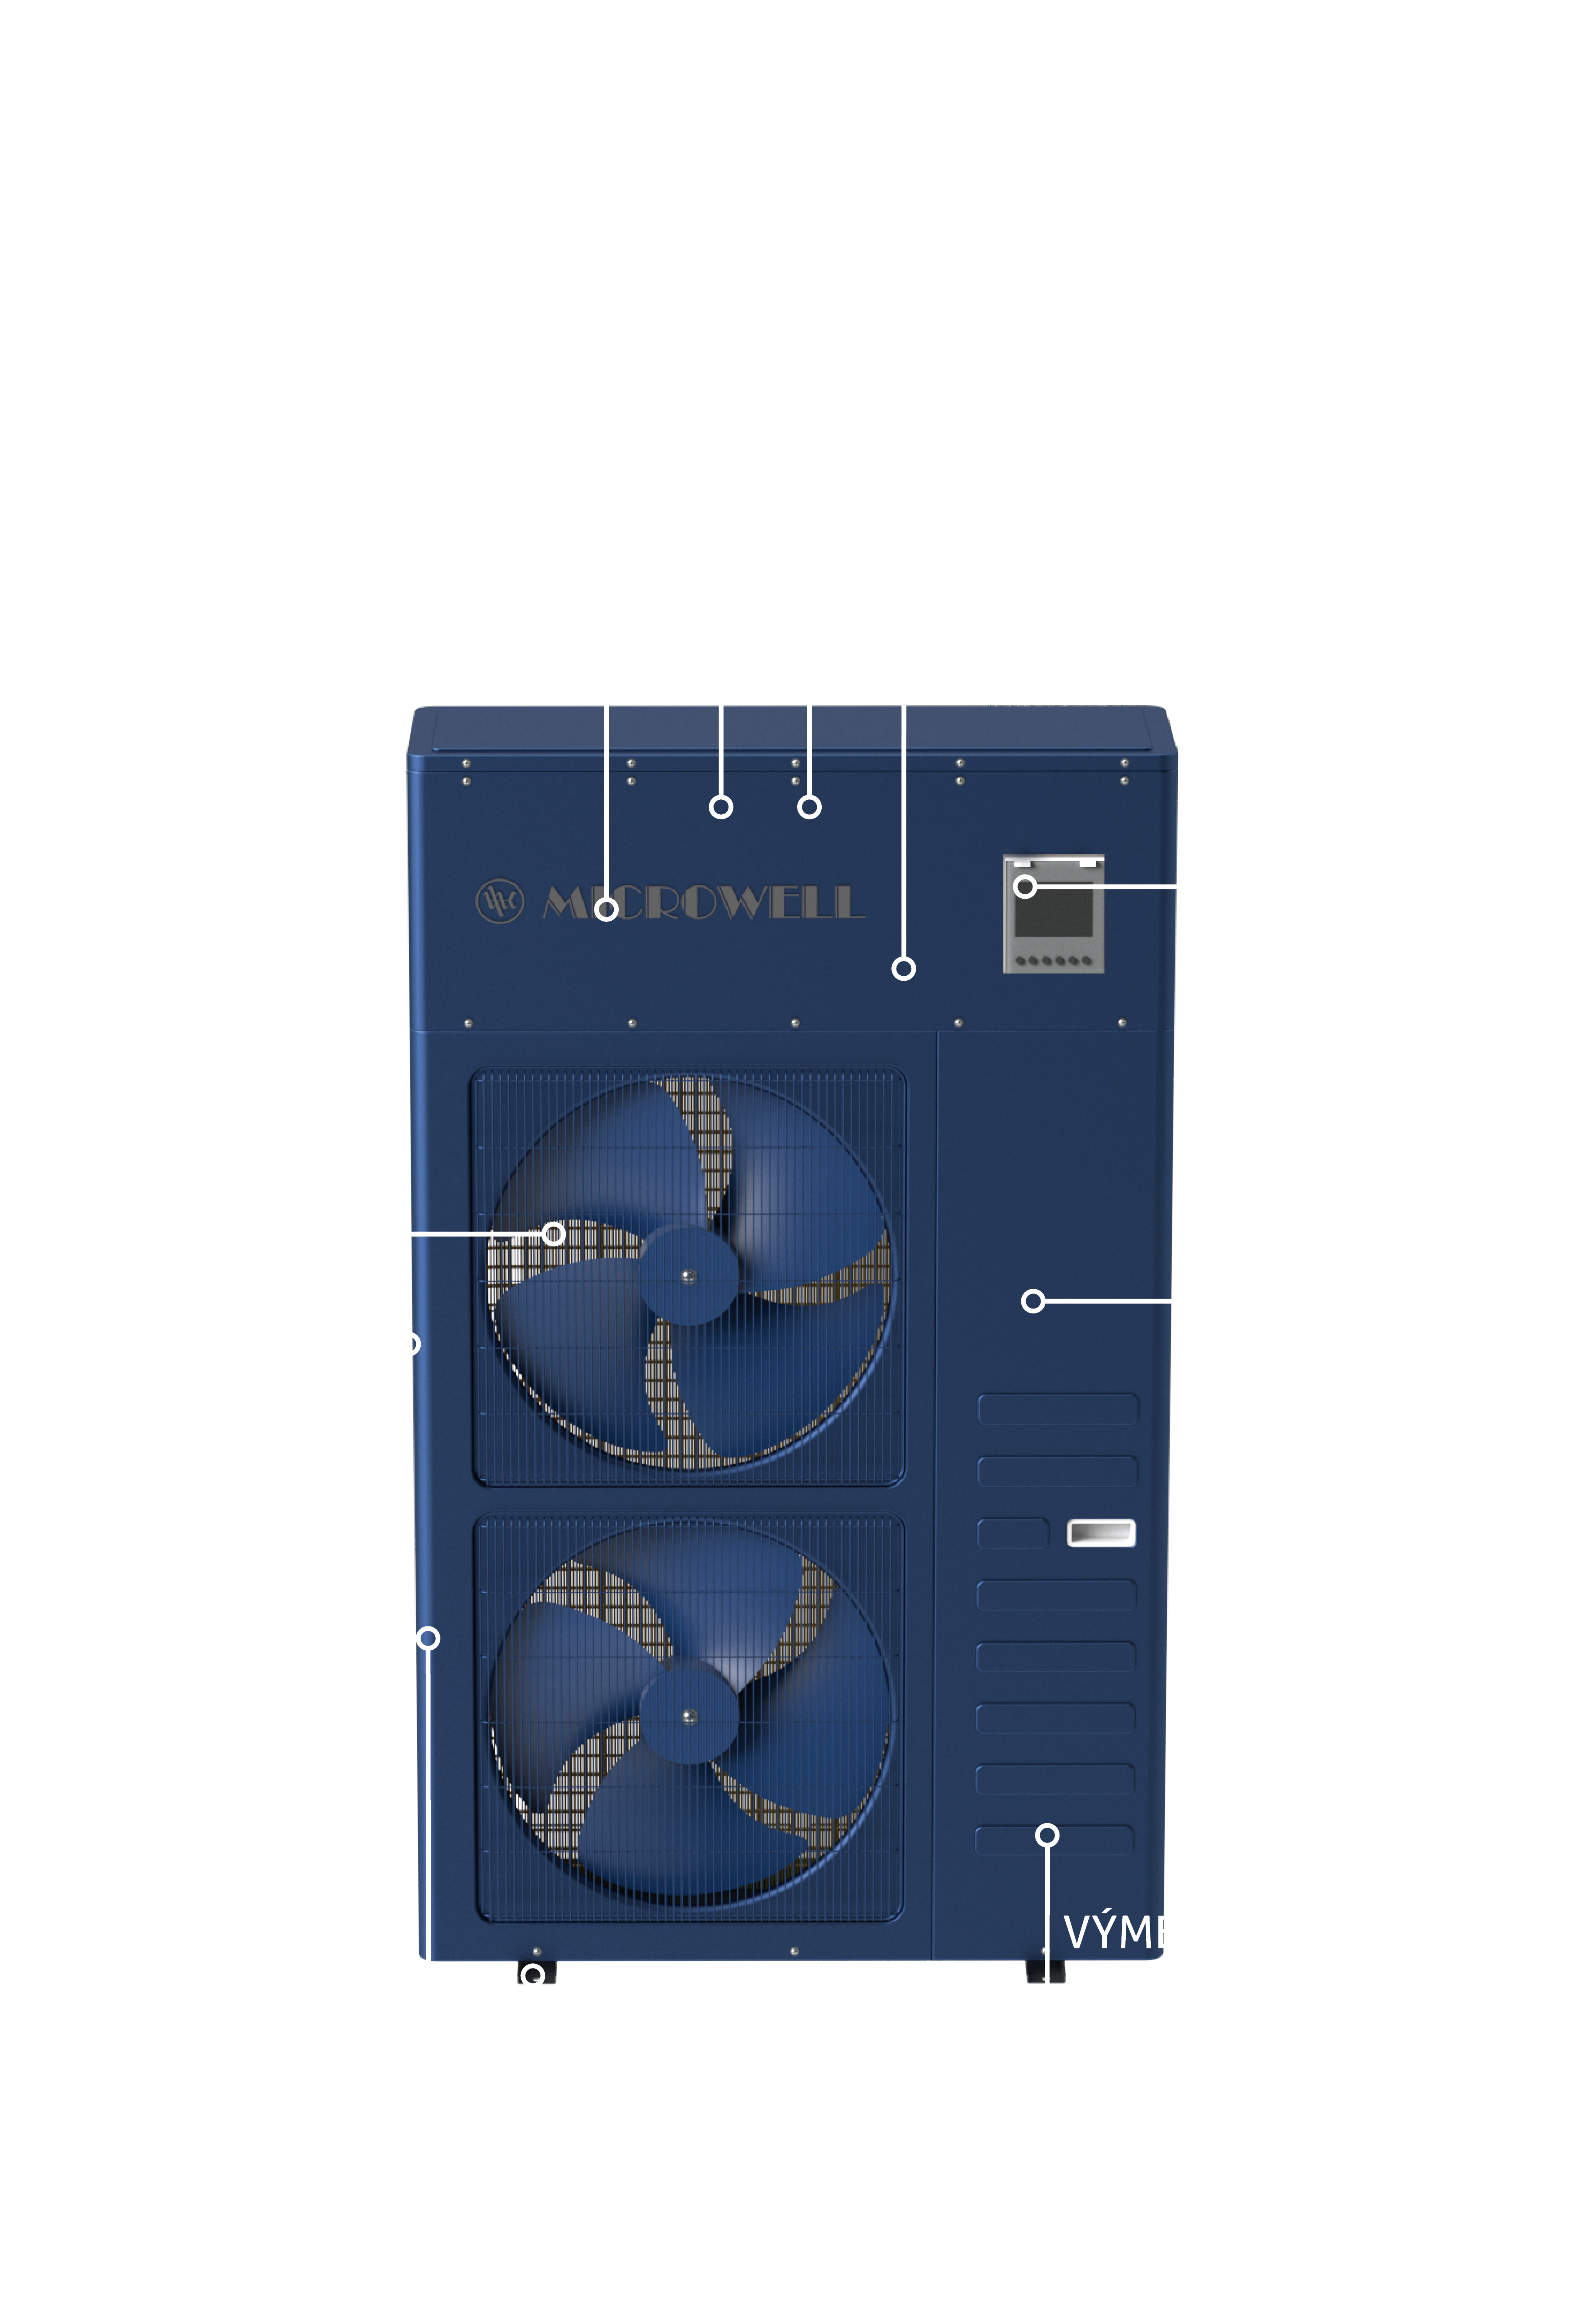 HP 2800 - Microwell